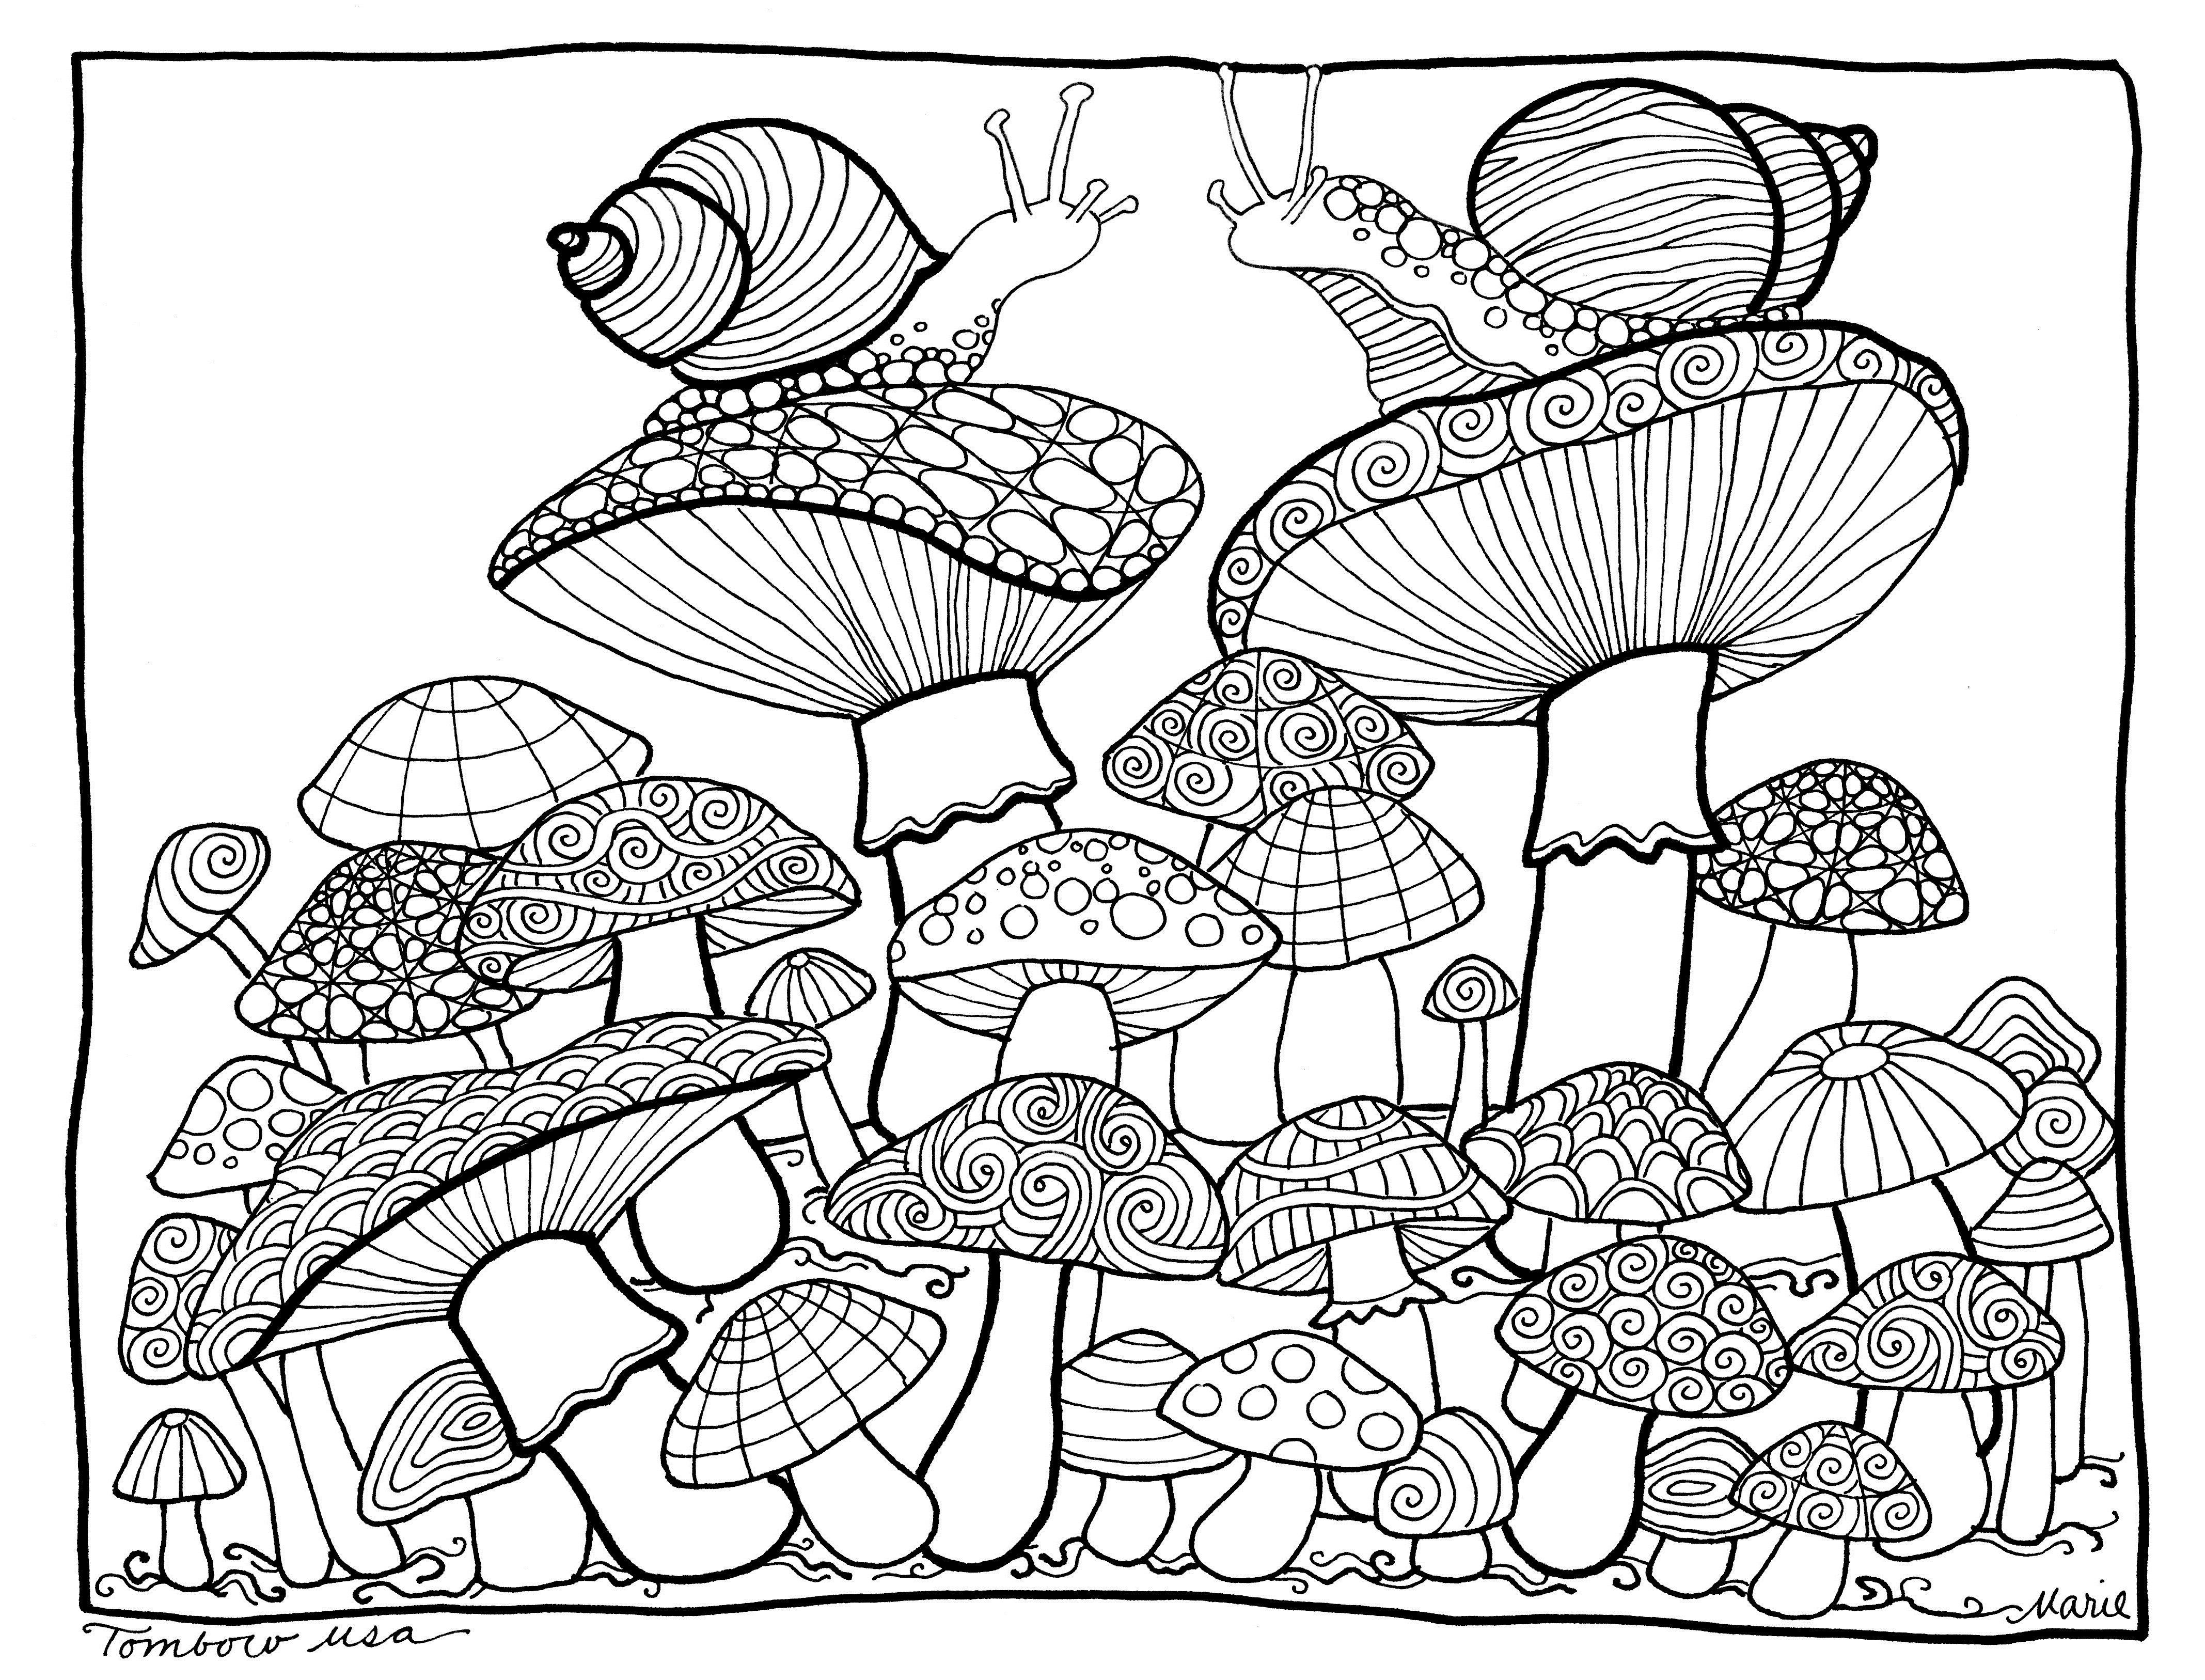 Mushrooms Coloring Pagetombow Usa | Paper | Coloring Pages, Free - Free Printable Mushroom Coloring Pages